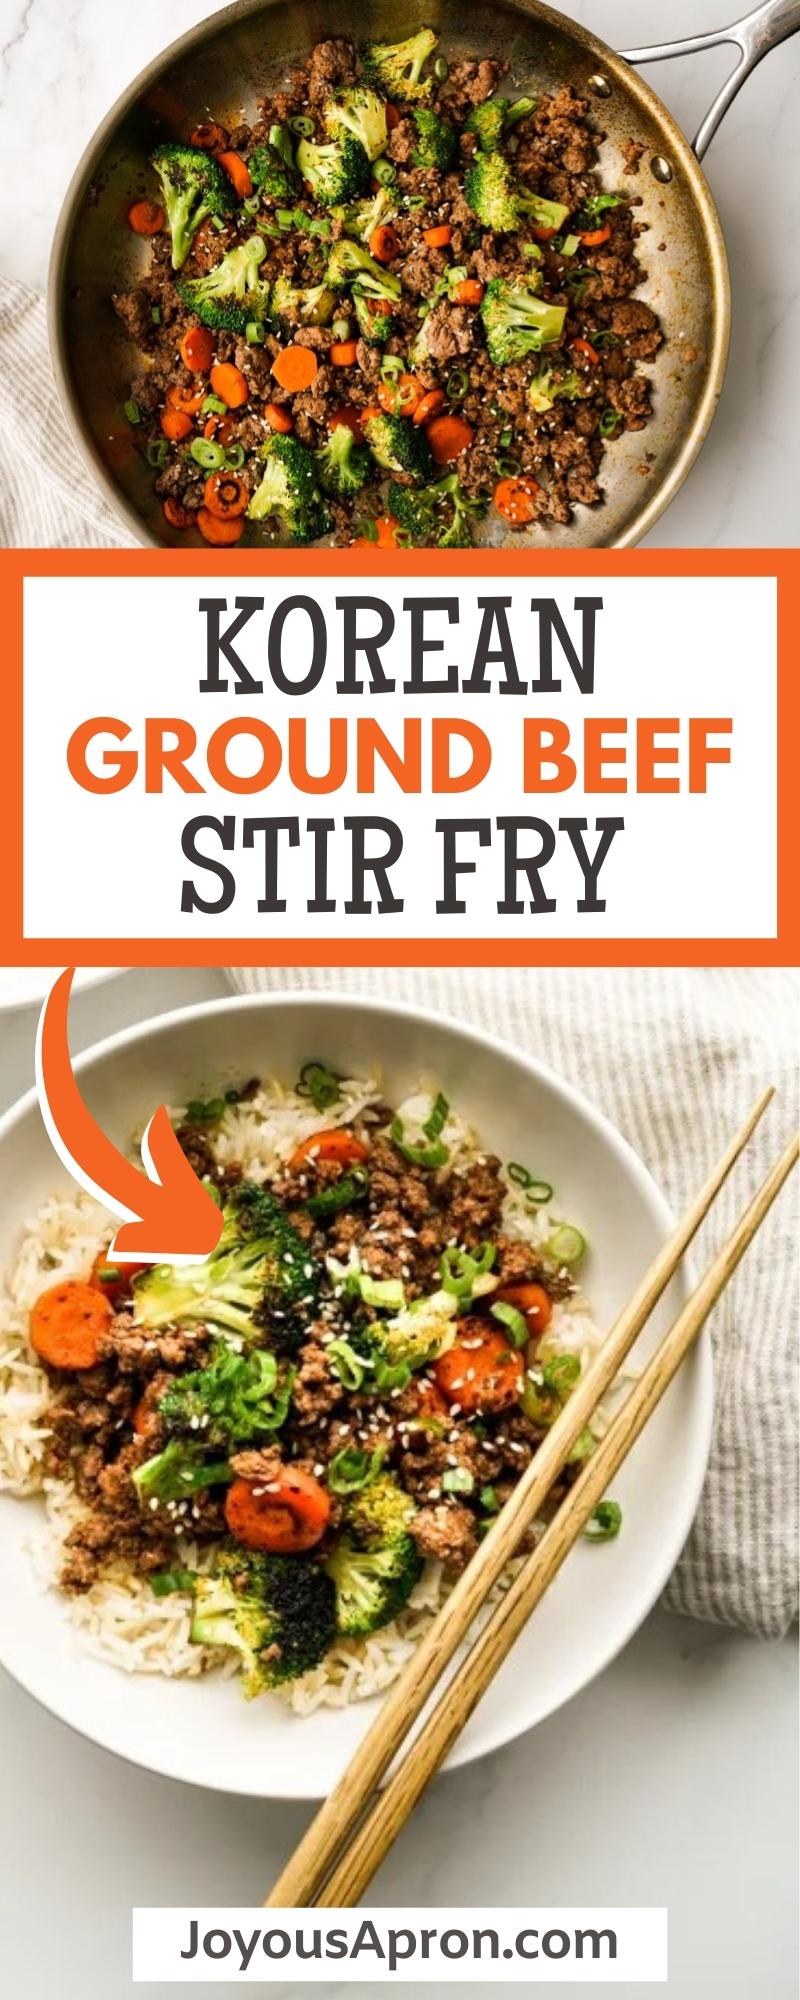 Korean Ground Beef Stir Fry - easy Ground Beef Stir Fry recipe for a quick and yummy dinner! Ground lean beef, broccoli, carrots, garlic tossed in a bold-flavored zesty, savory and sweet Korean inspired sauce. via @joyousapron